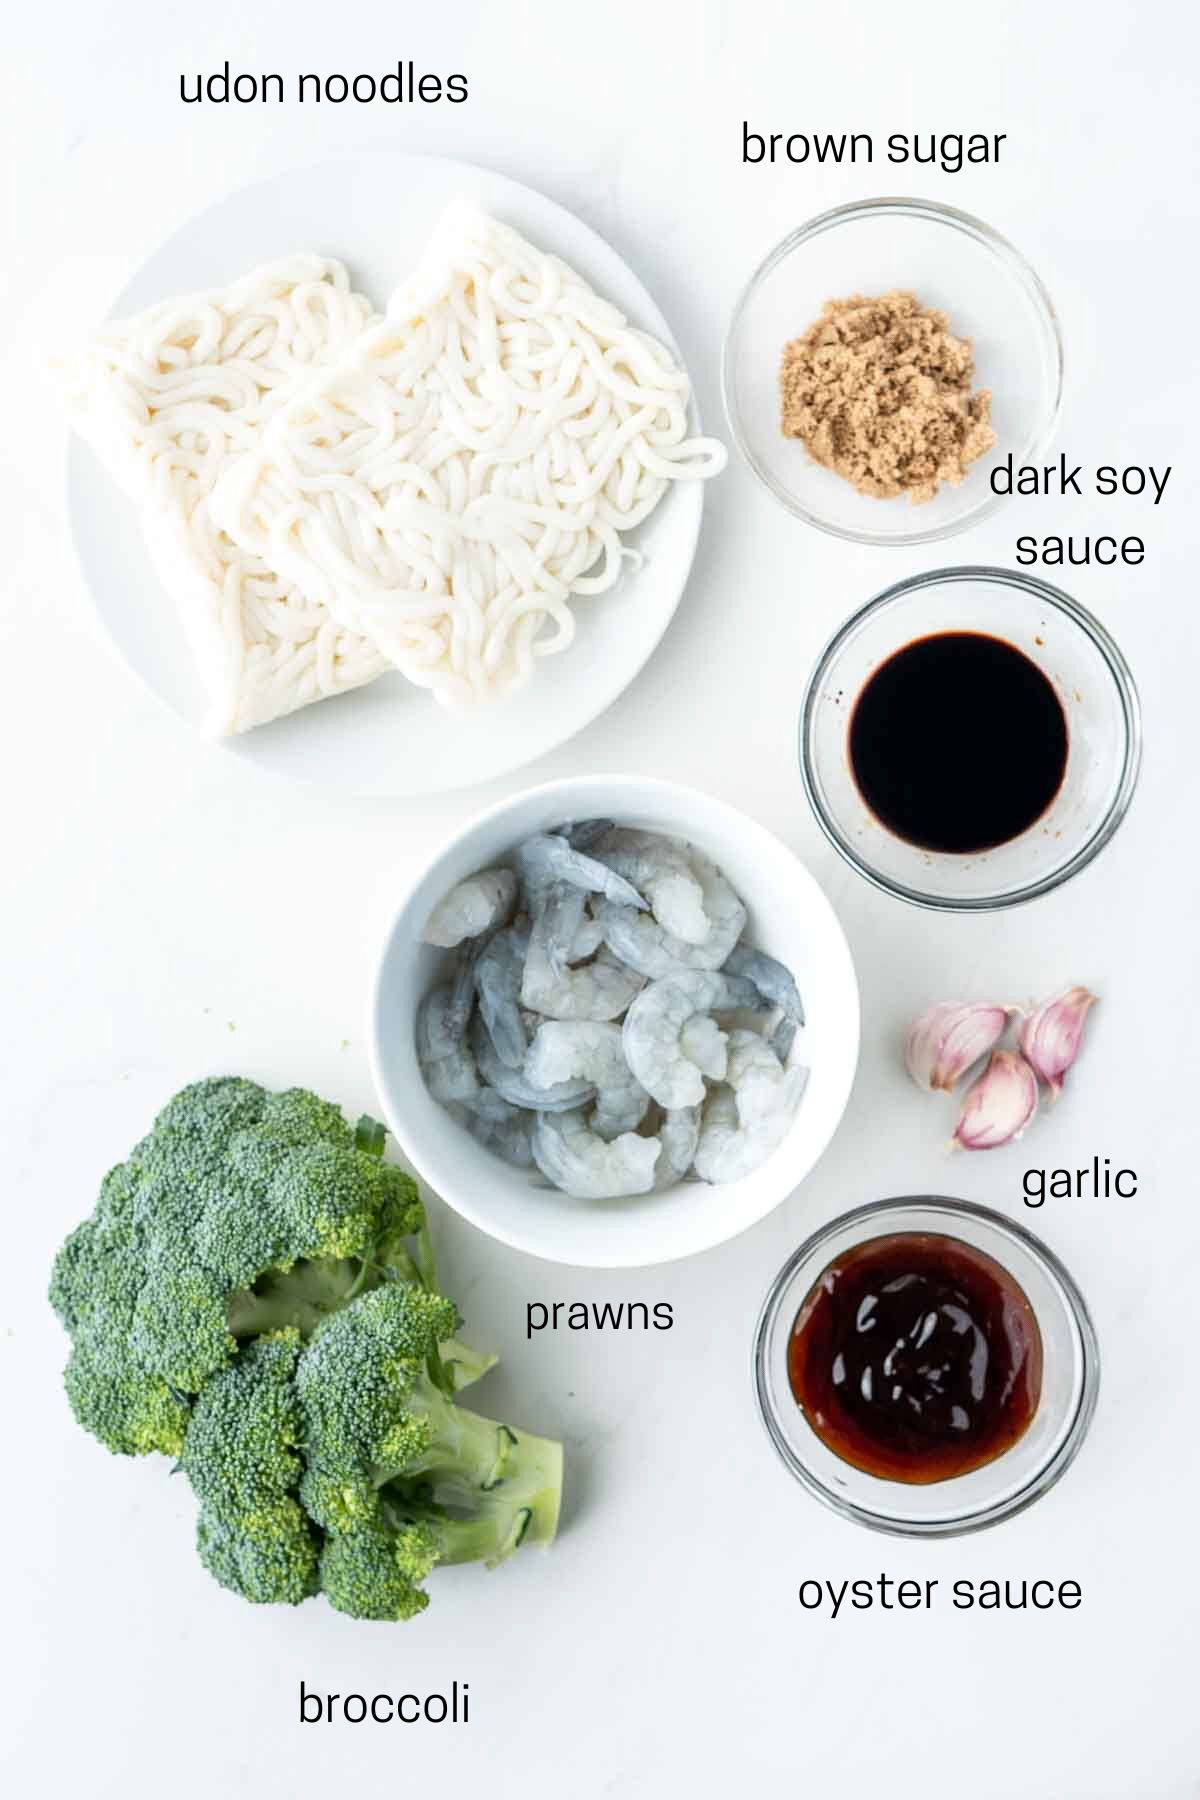 All ingredients needed to make garlic prawn noodles laid out in bowls.